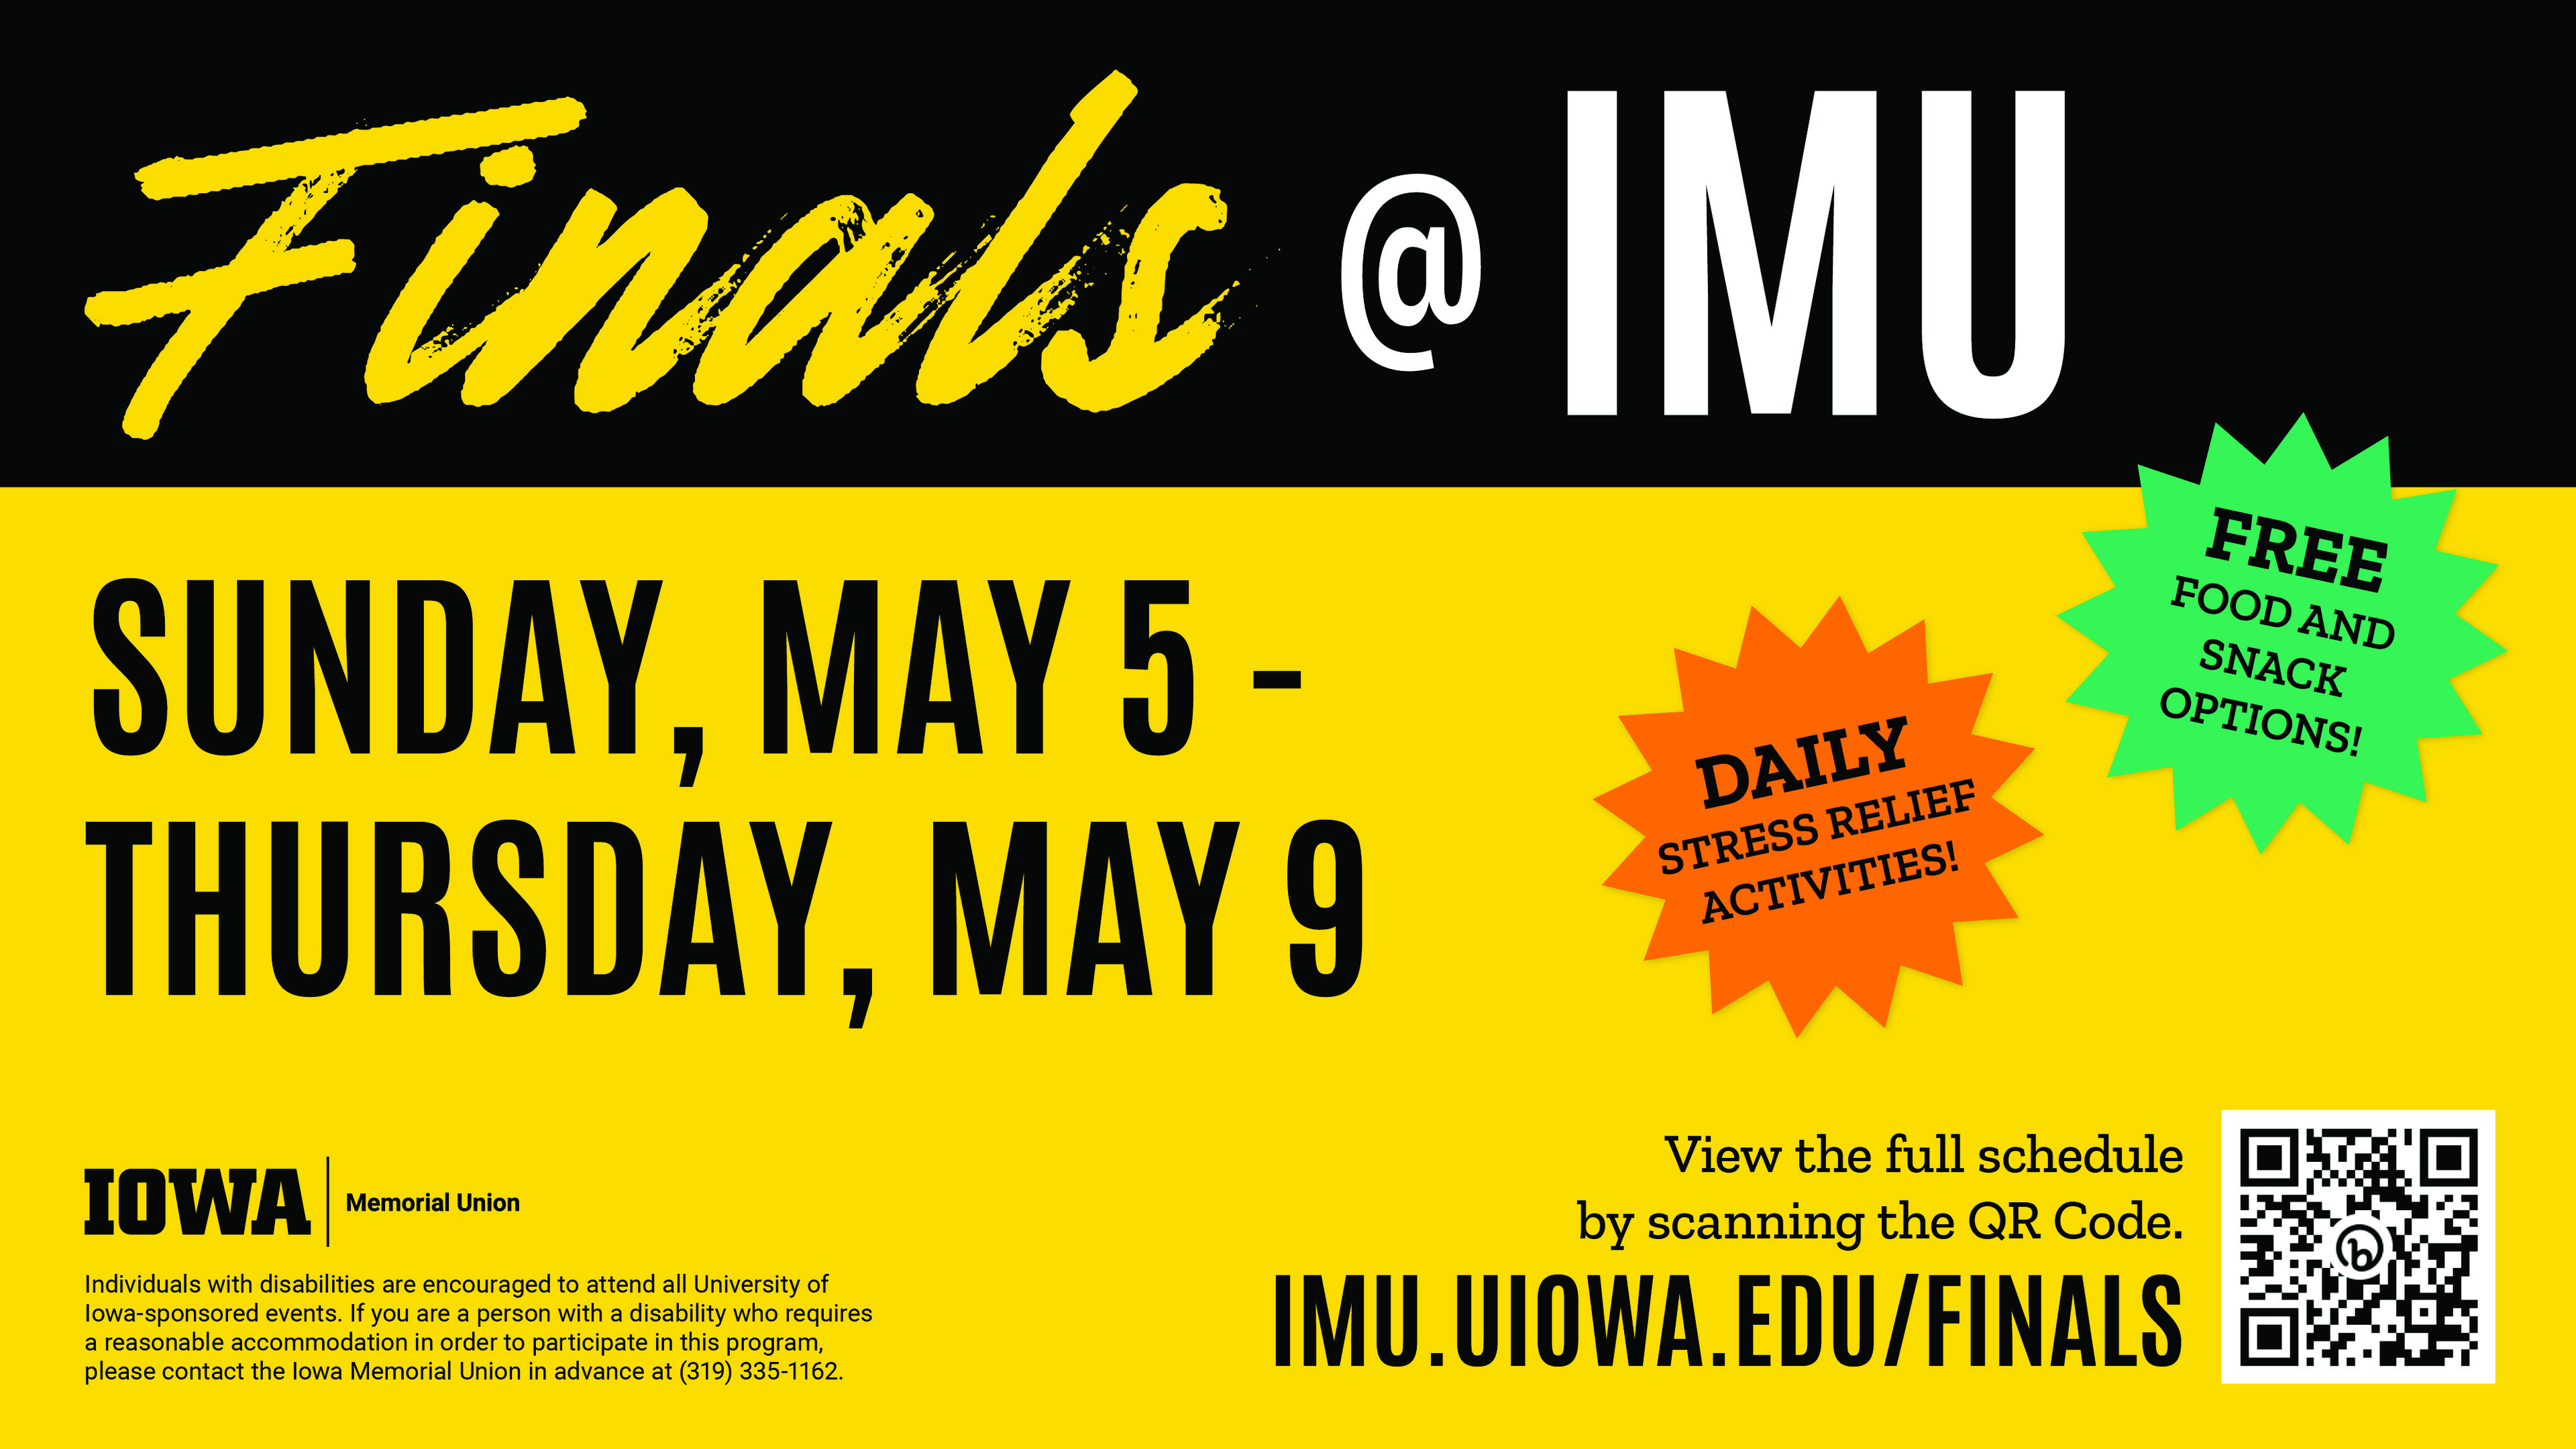 IMU, Sunday, May 5 to Thursday, May 9 - Daily stress relief activities and free snacks